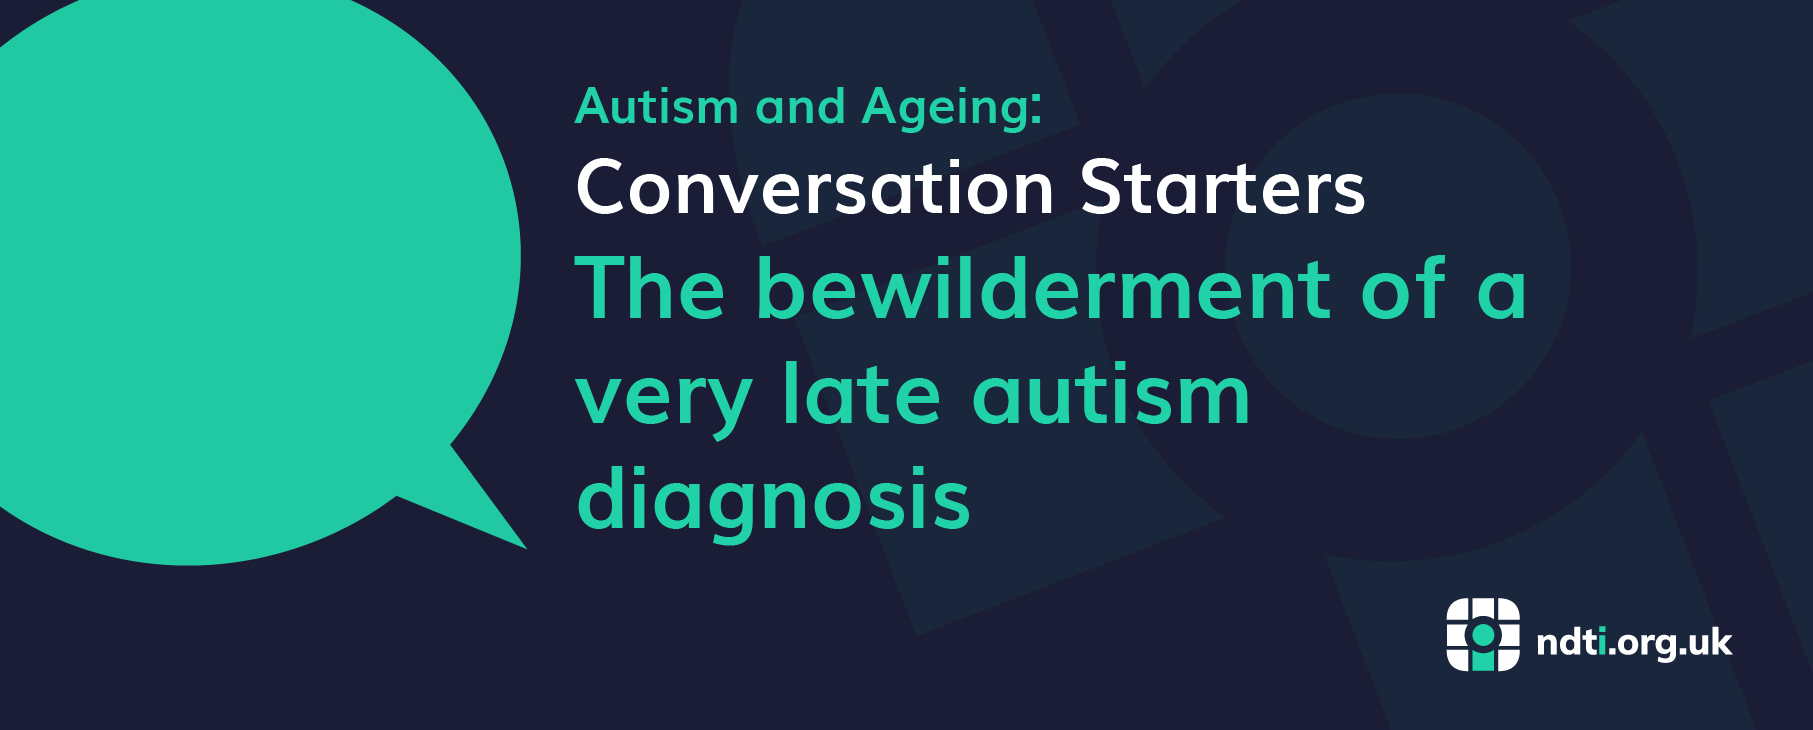 The bewilderment of a very late autism diagnosis 01